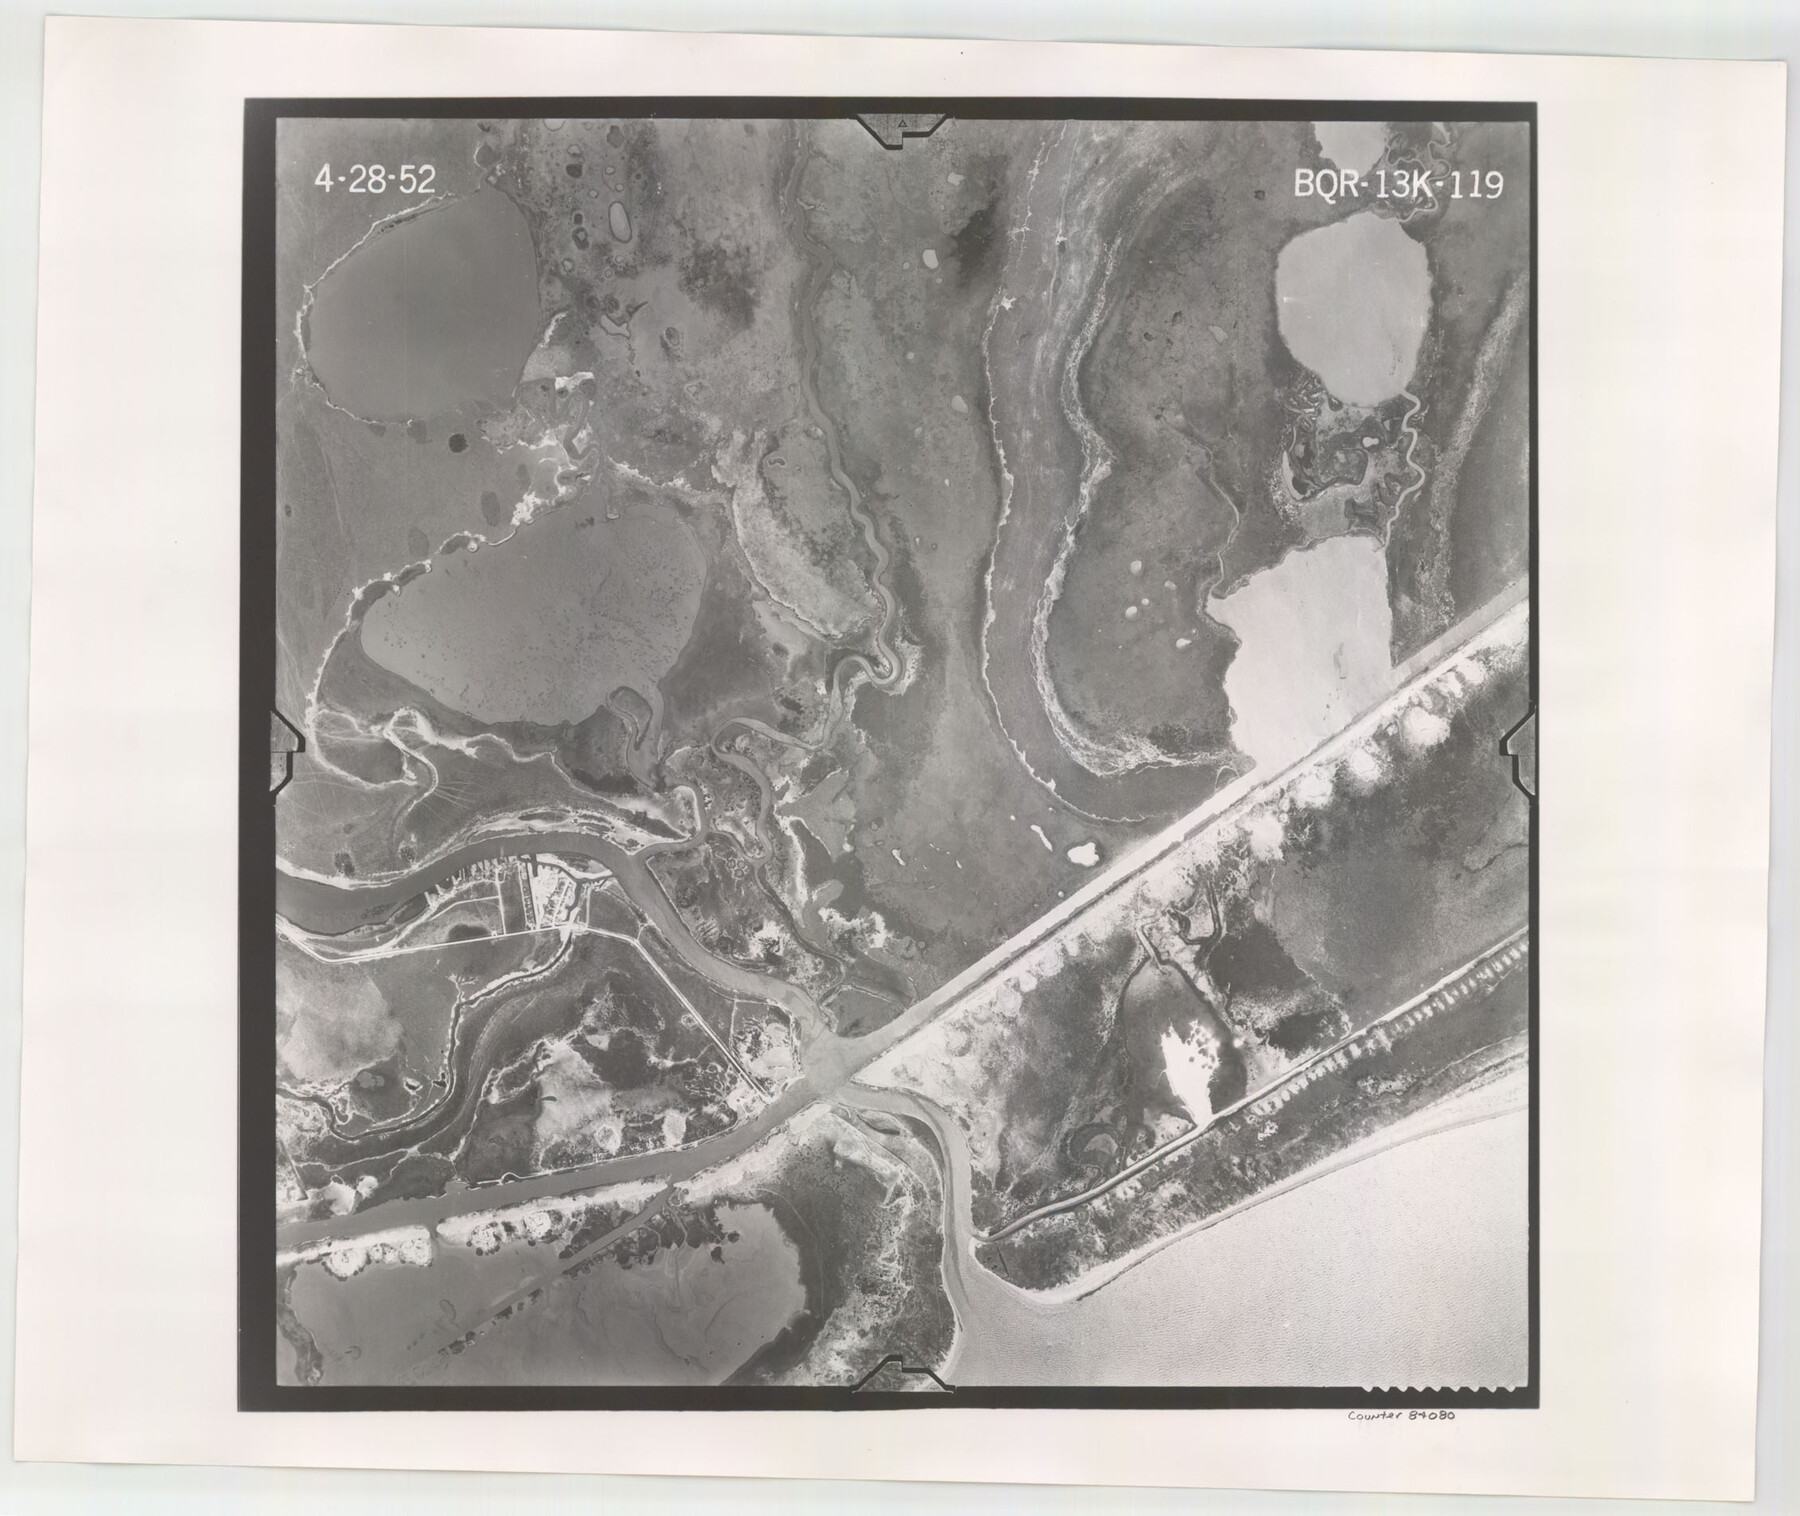 84080, Flight Mission No. BQR-13K, Frame 119, Brazoria County, General Map Collection